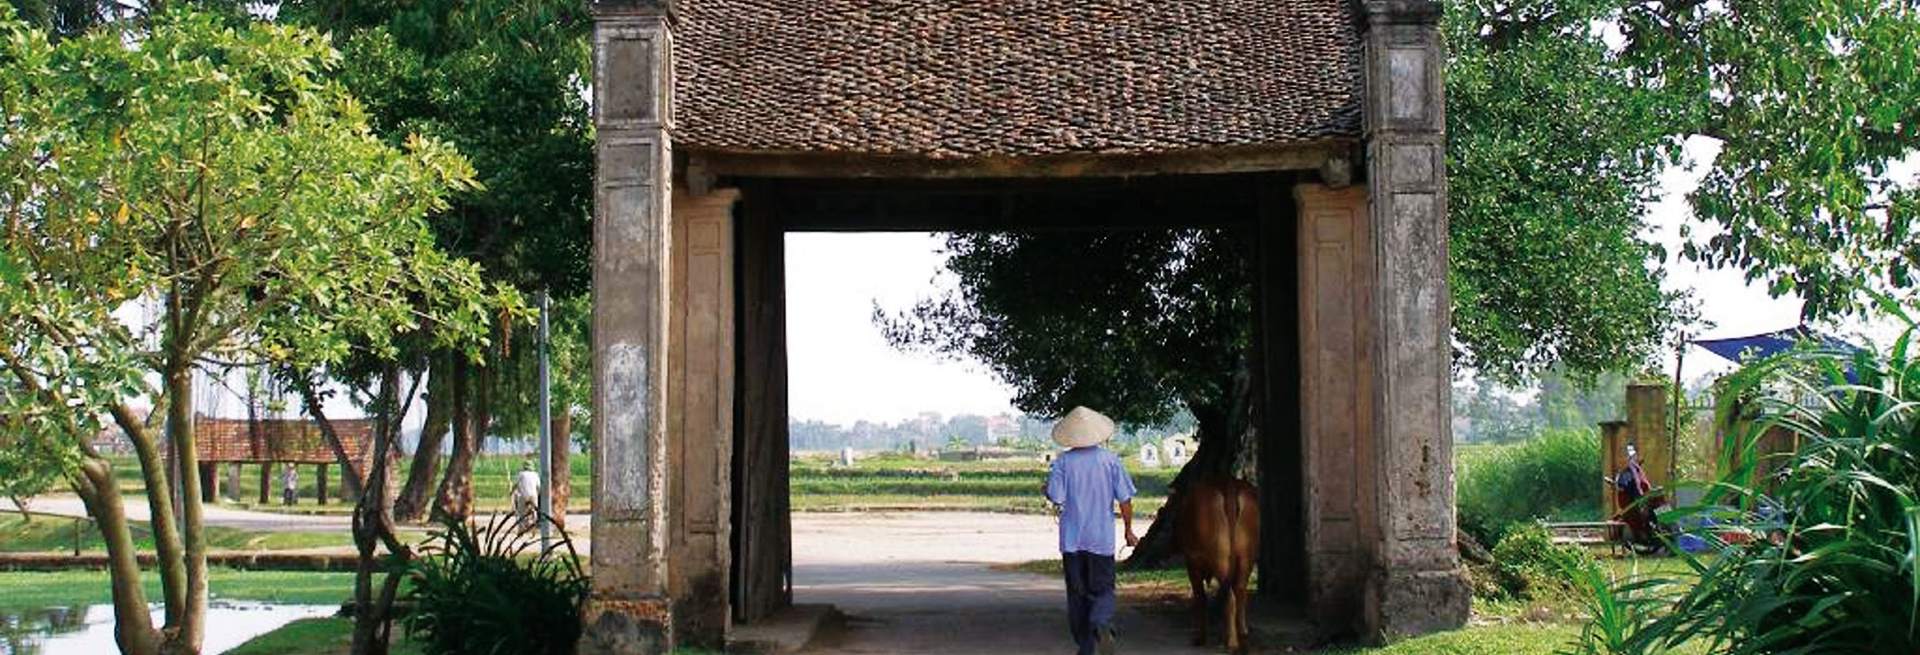 1-Day Discovering Duong Lam Ancient Village In Vietnam [2022]